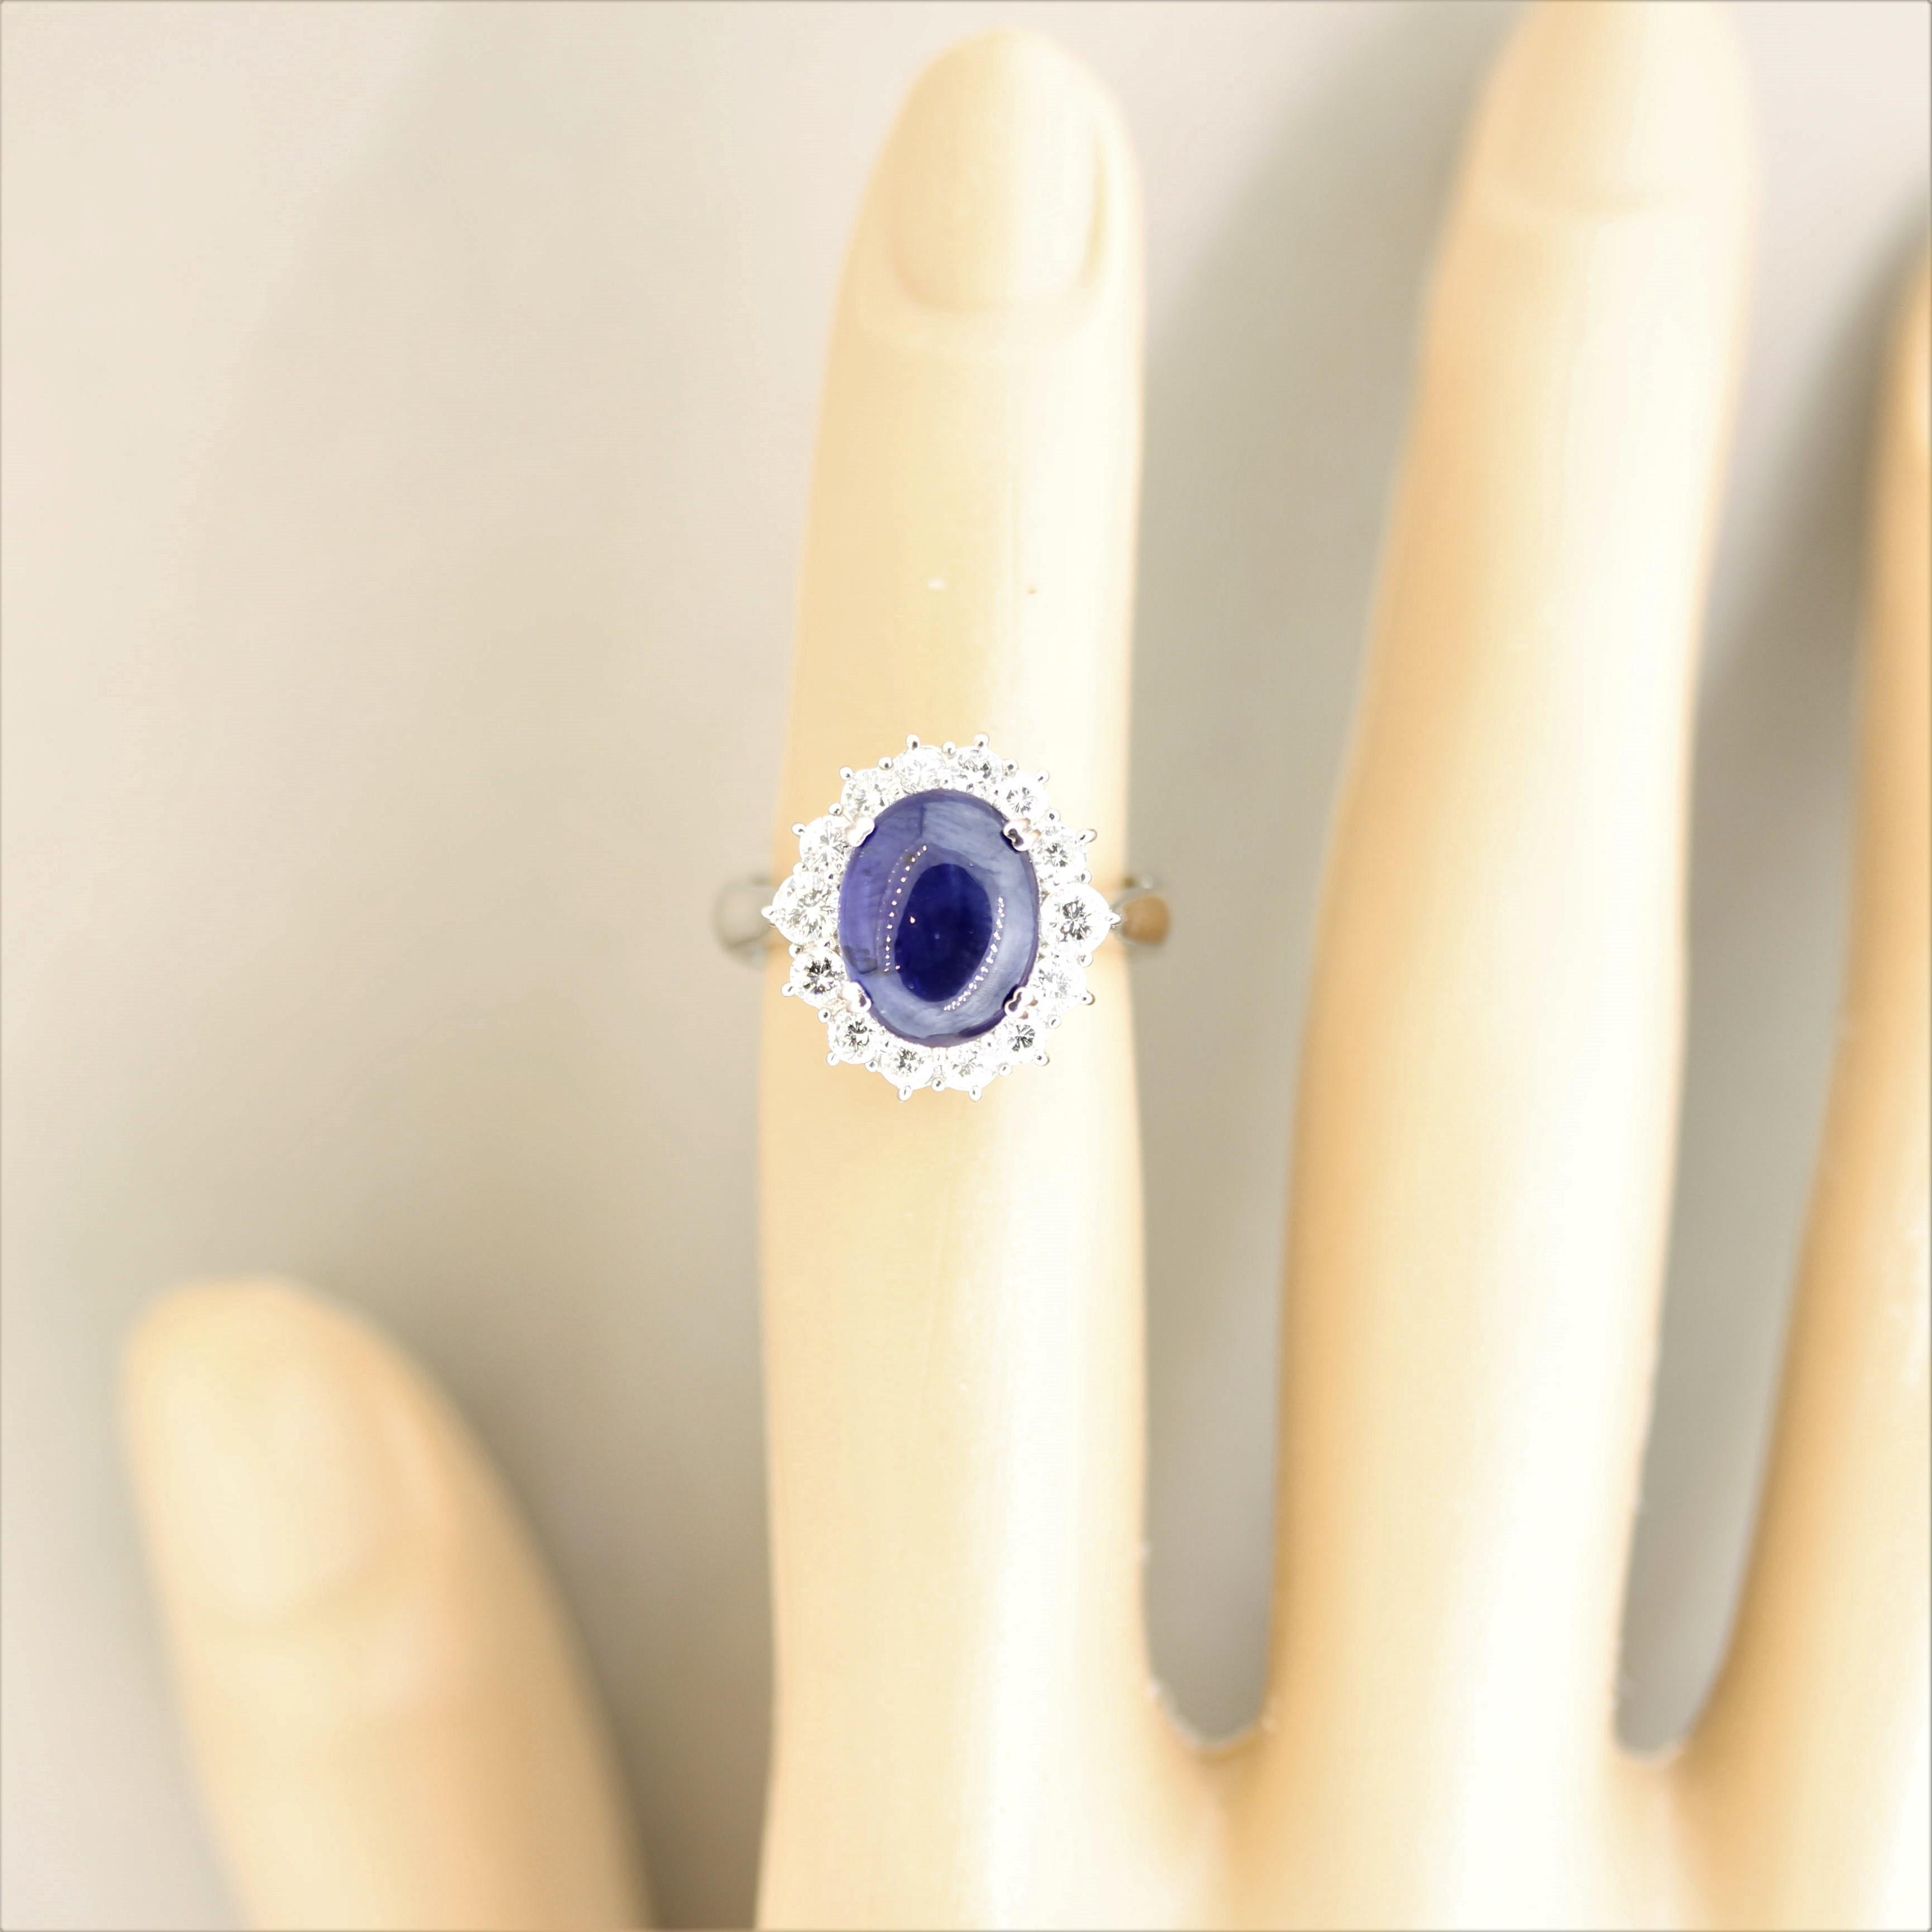 A luscious vivid blue sapphire takes center stage! It weighs 4.58 carats and has a rich evenly blue color that pleases the viewer. It is accented by 0.73 carats of fine round brilliant-cut diamonds that halo the sapphire and add brilliance and